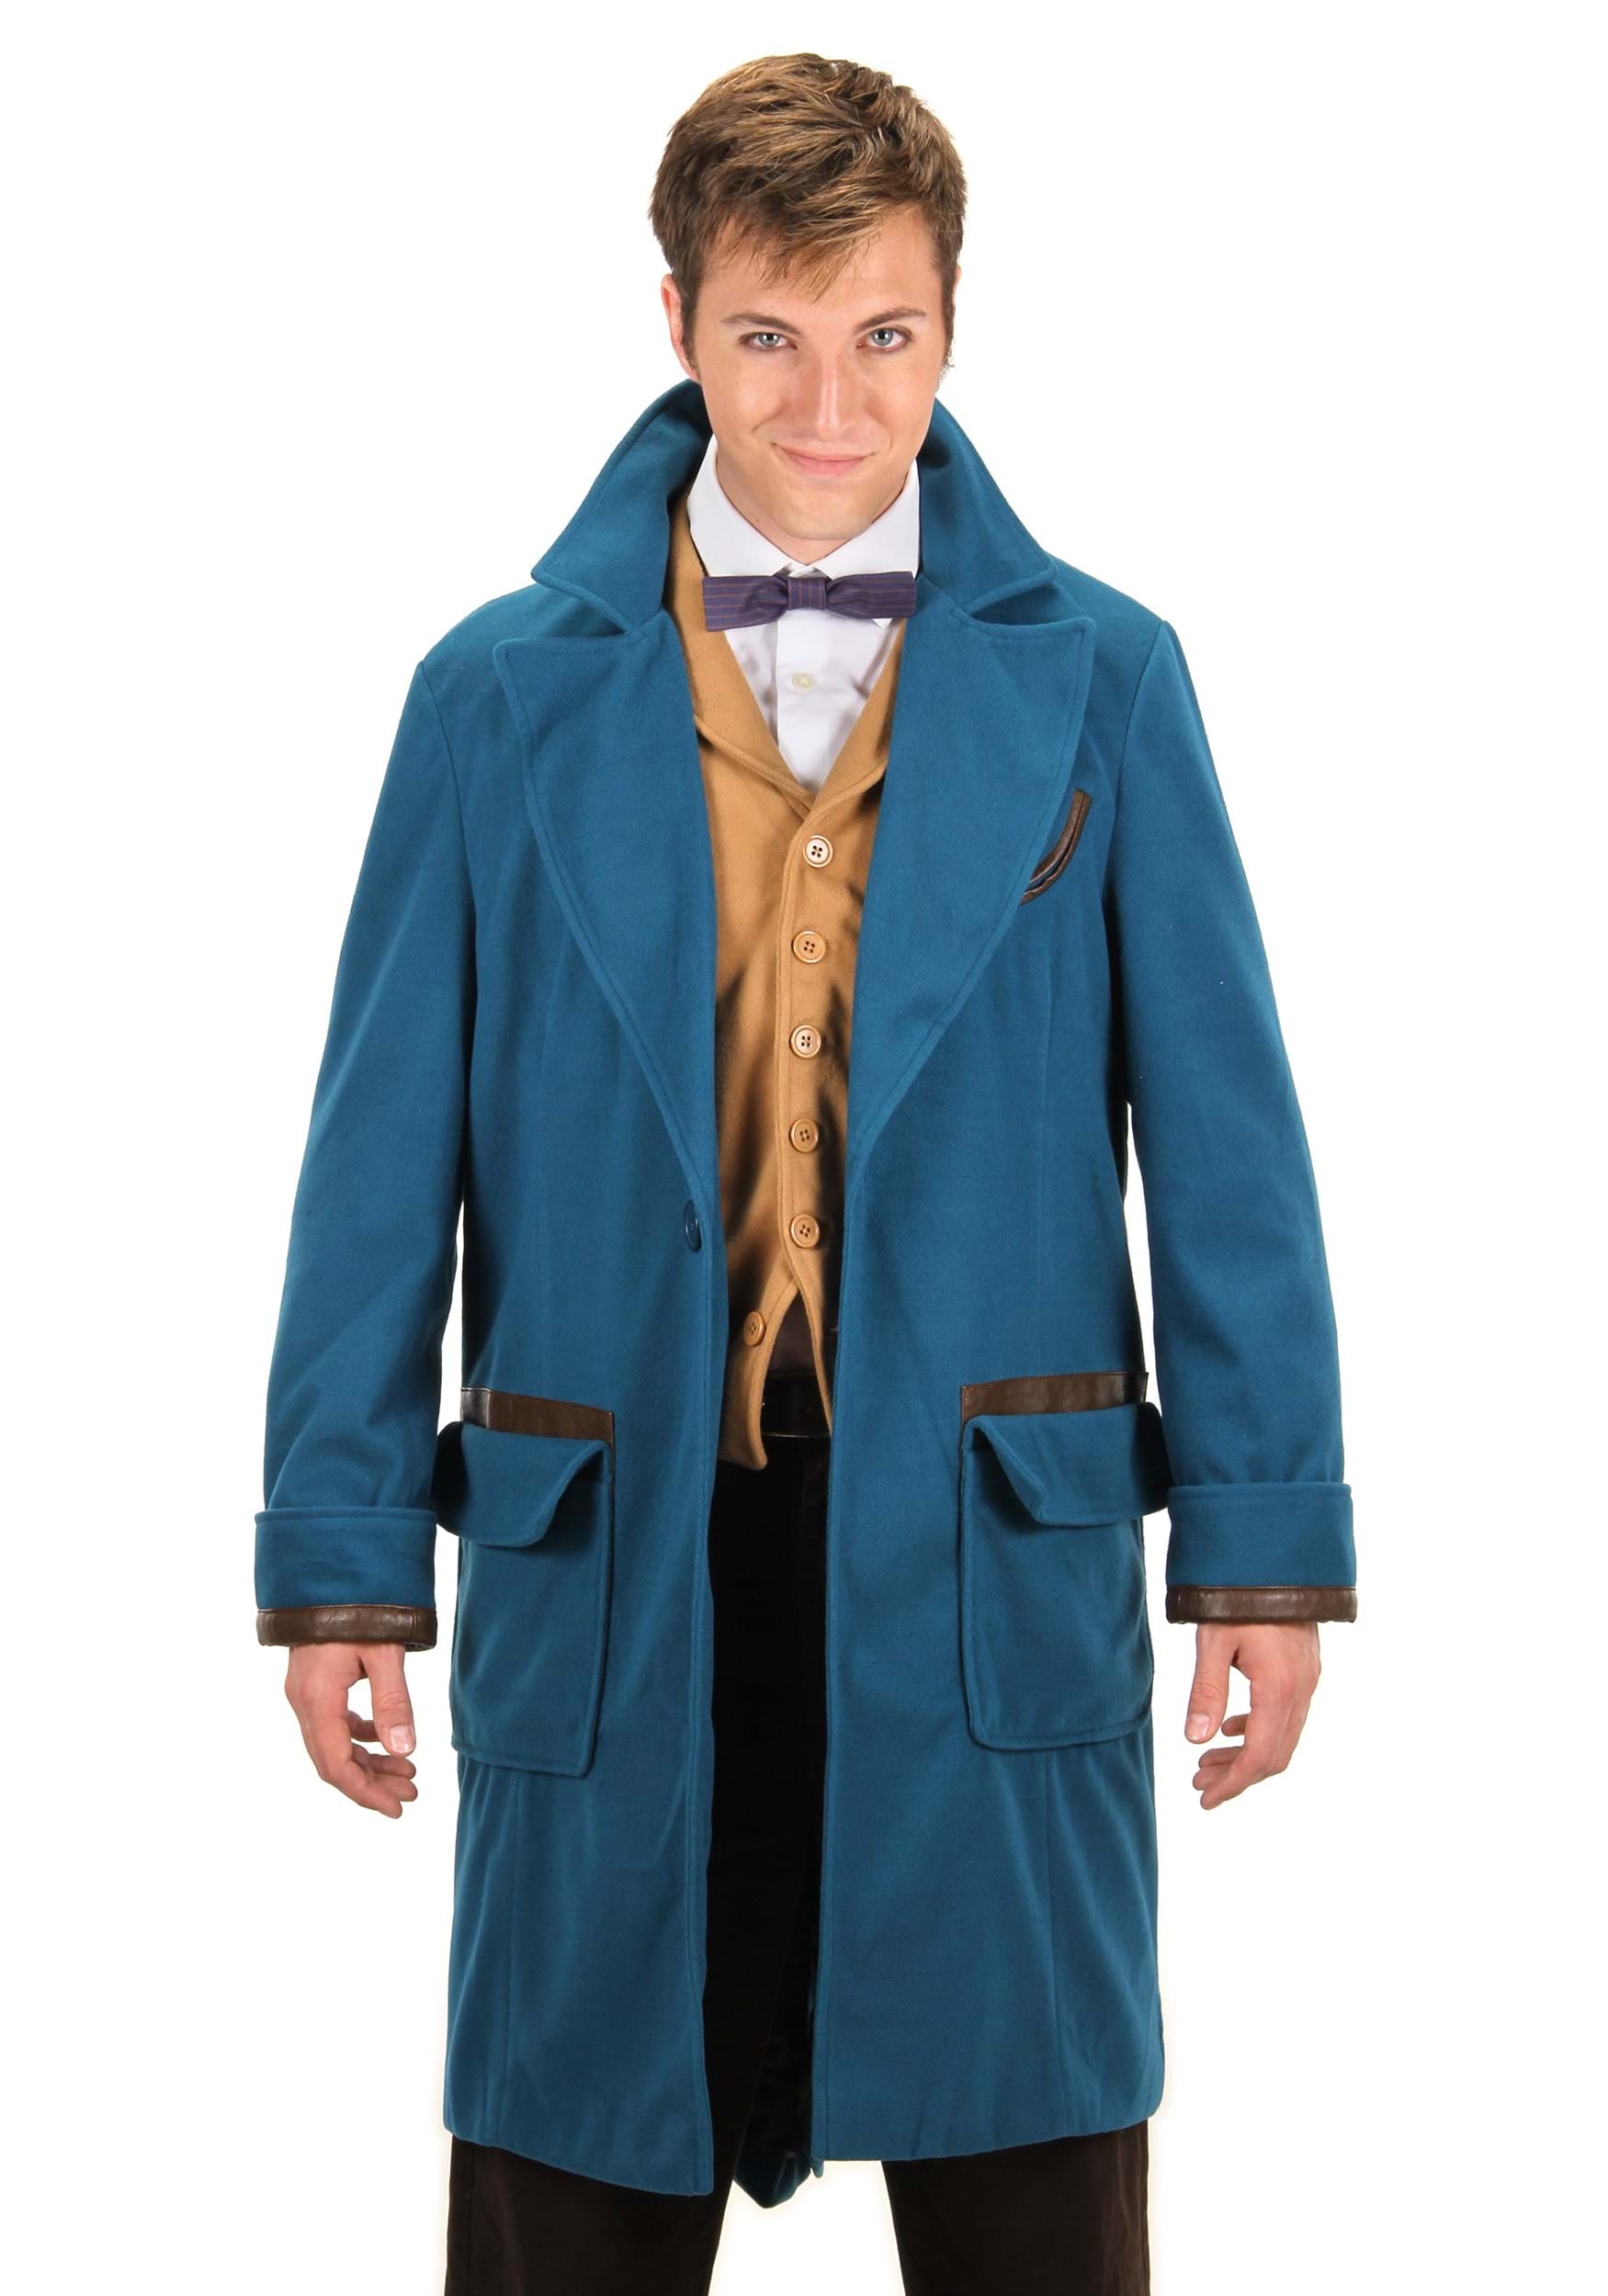 Newt Scamander Coat Costume Fantastic Beasts and Where to Find Them